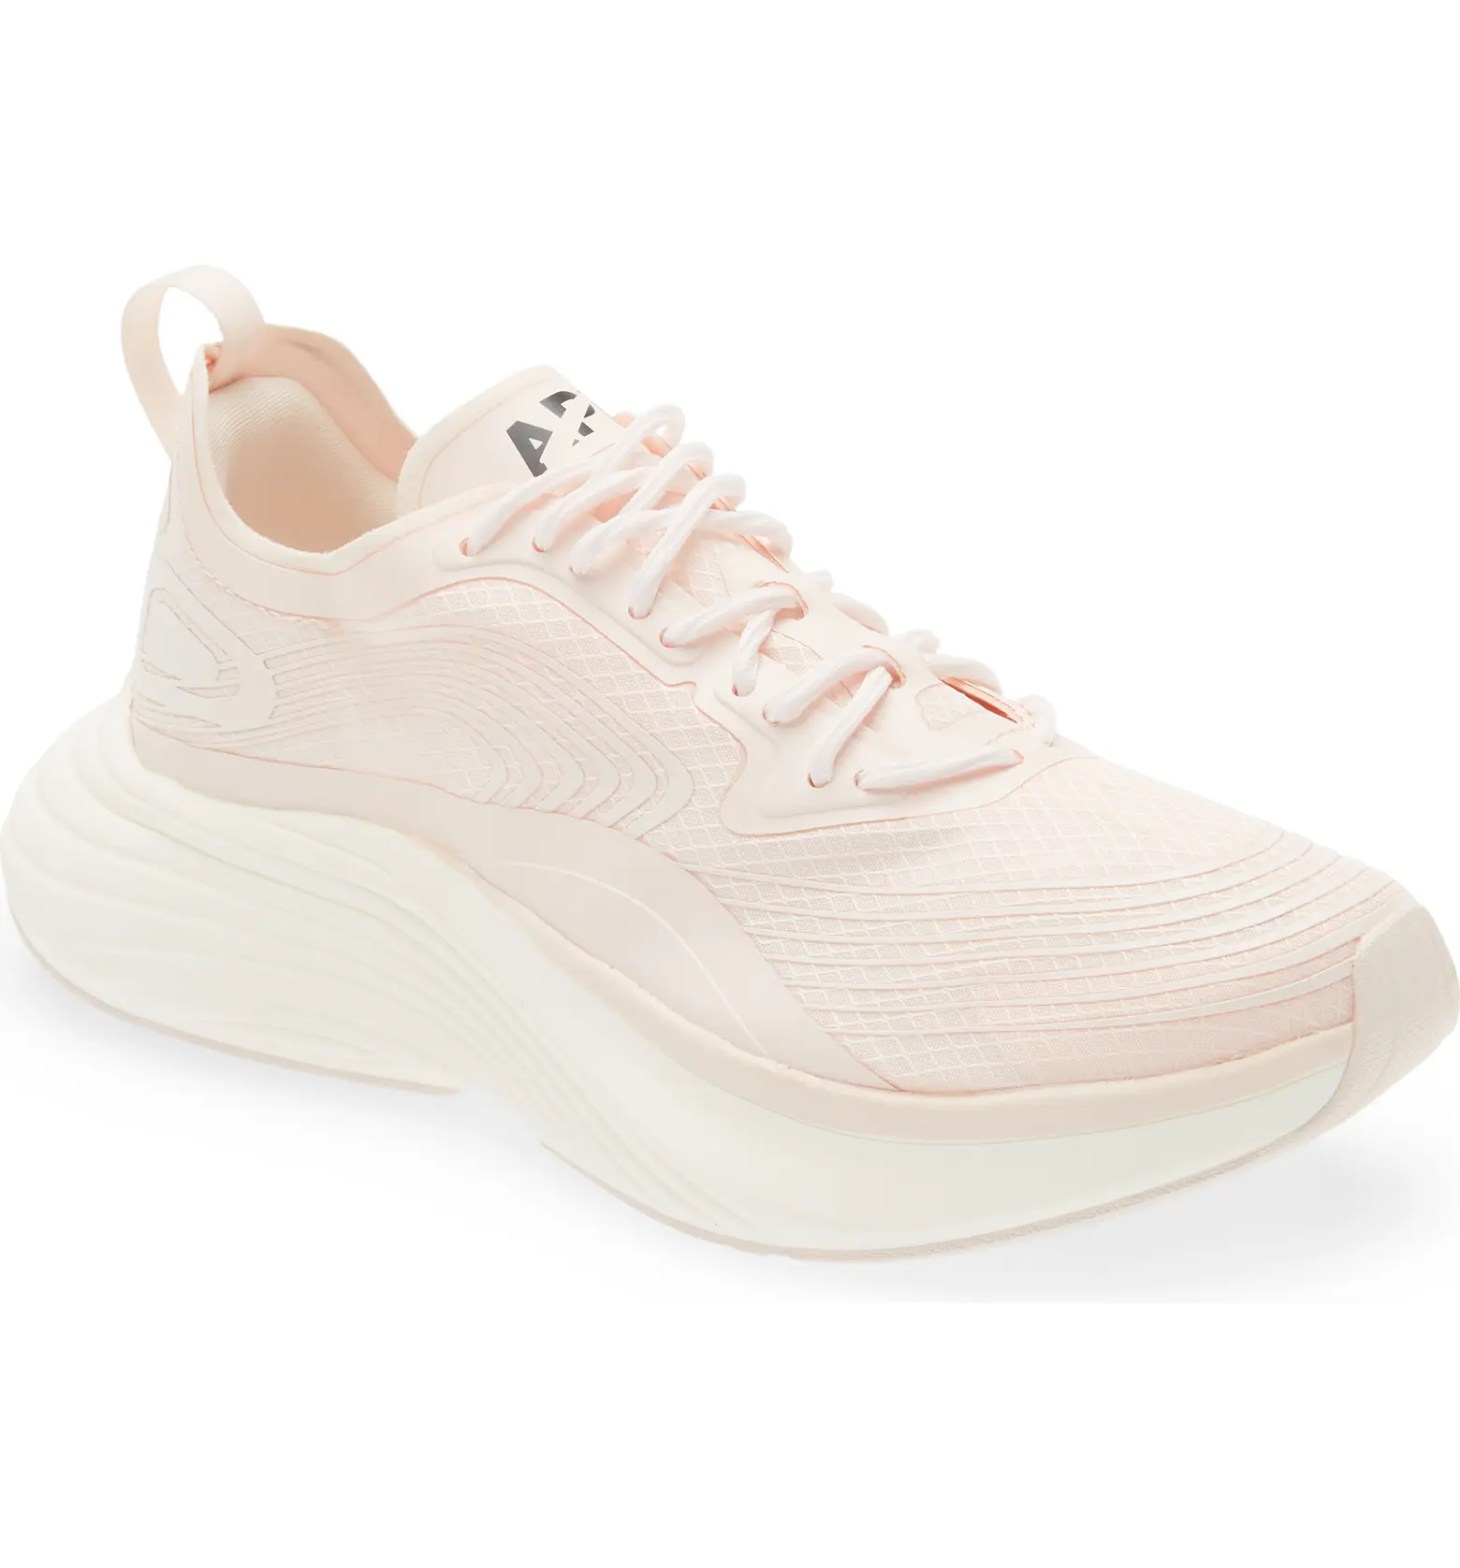 apl streamline running shoe in beige from the nordstrom sneaker sale on a white background